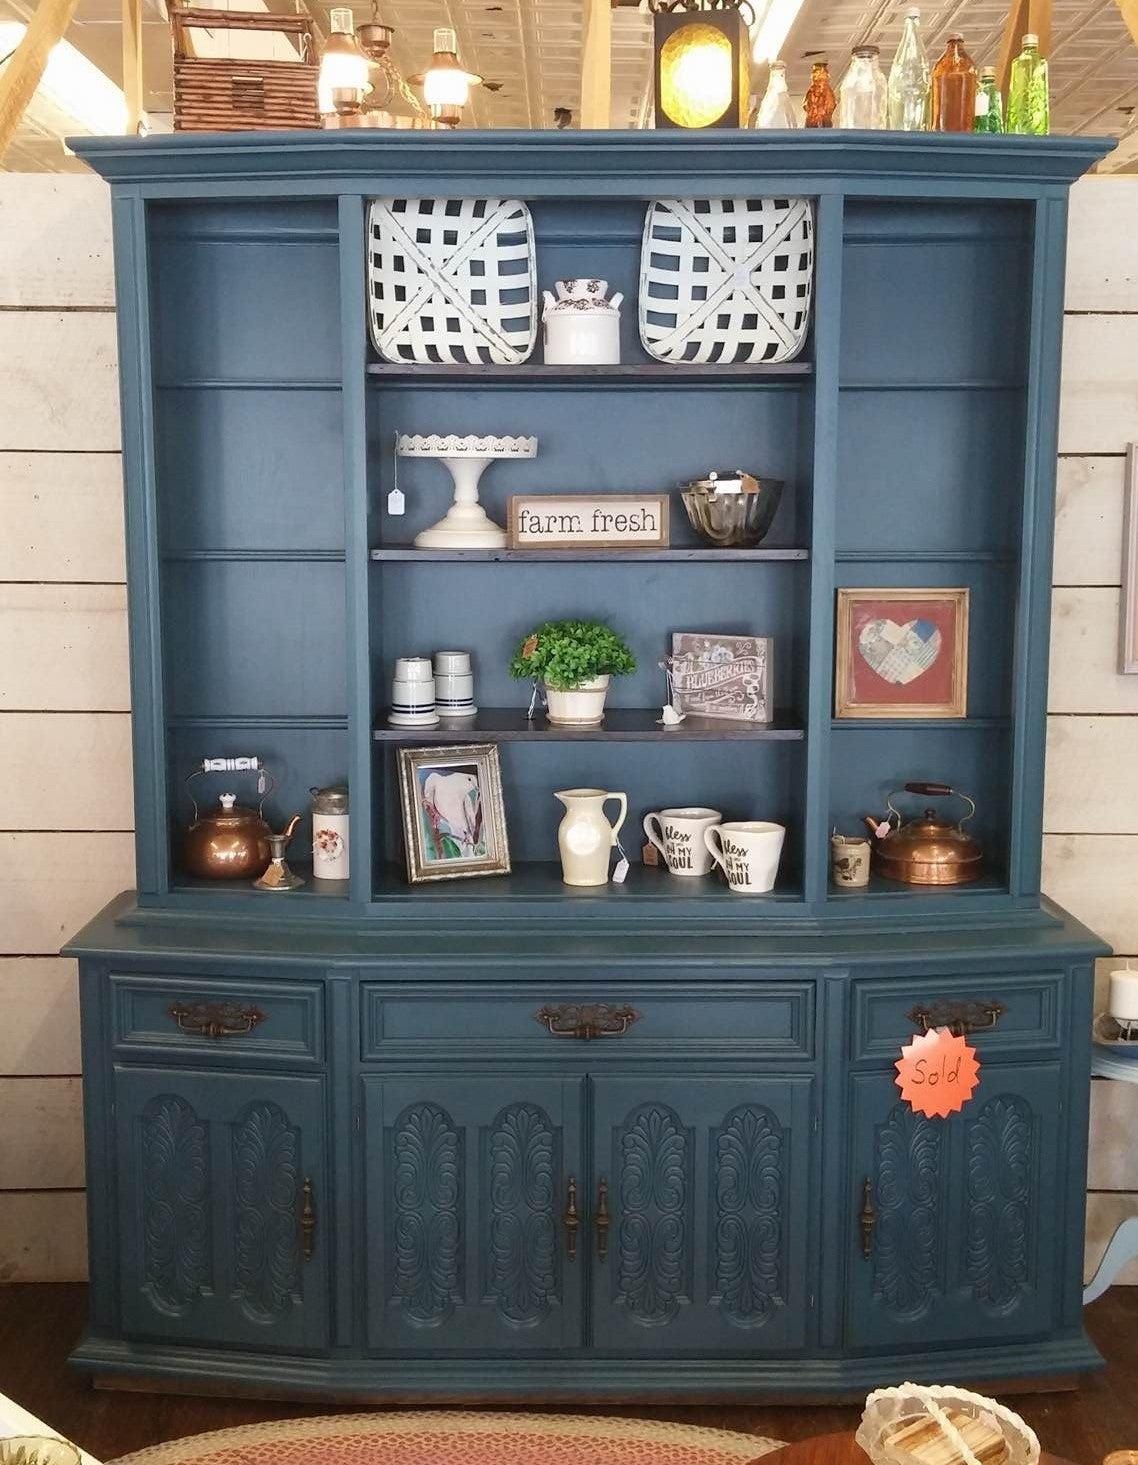 Denim Blue Furniture and Cabinet Paint